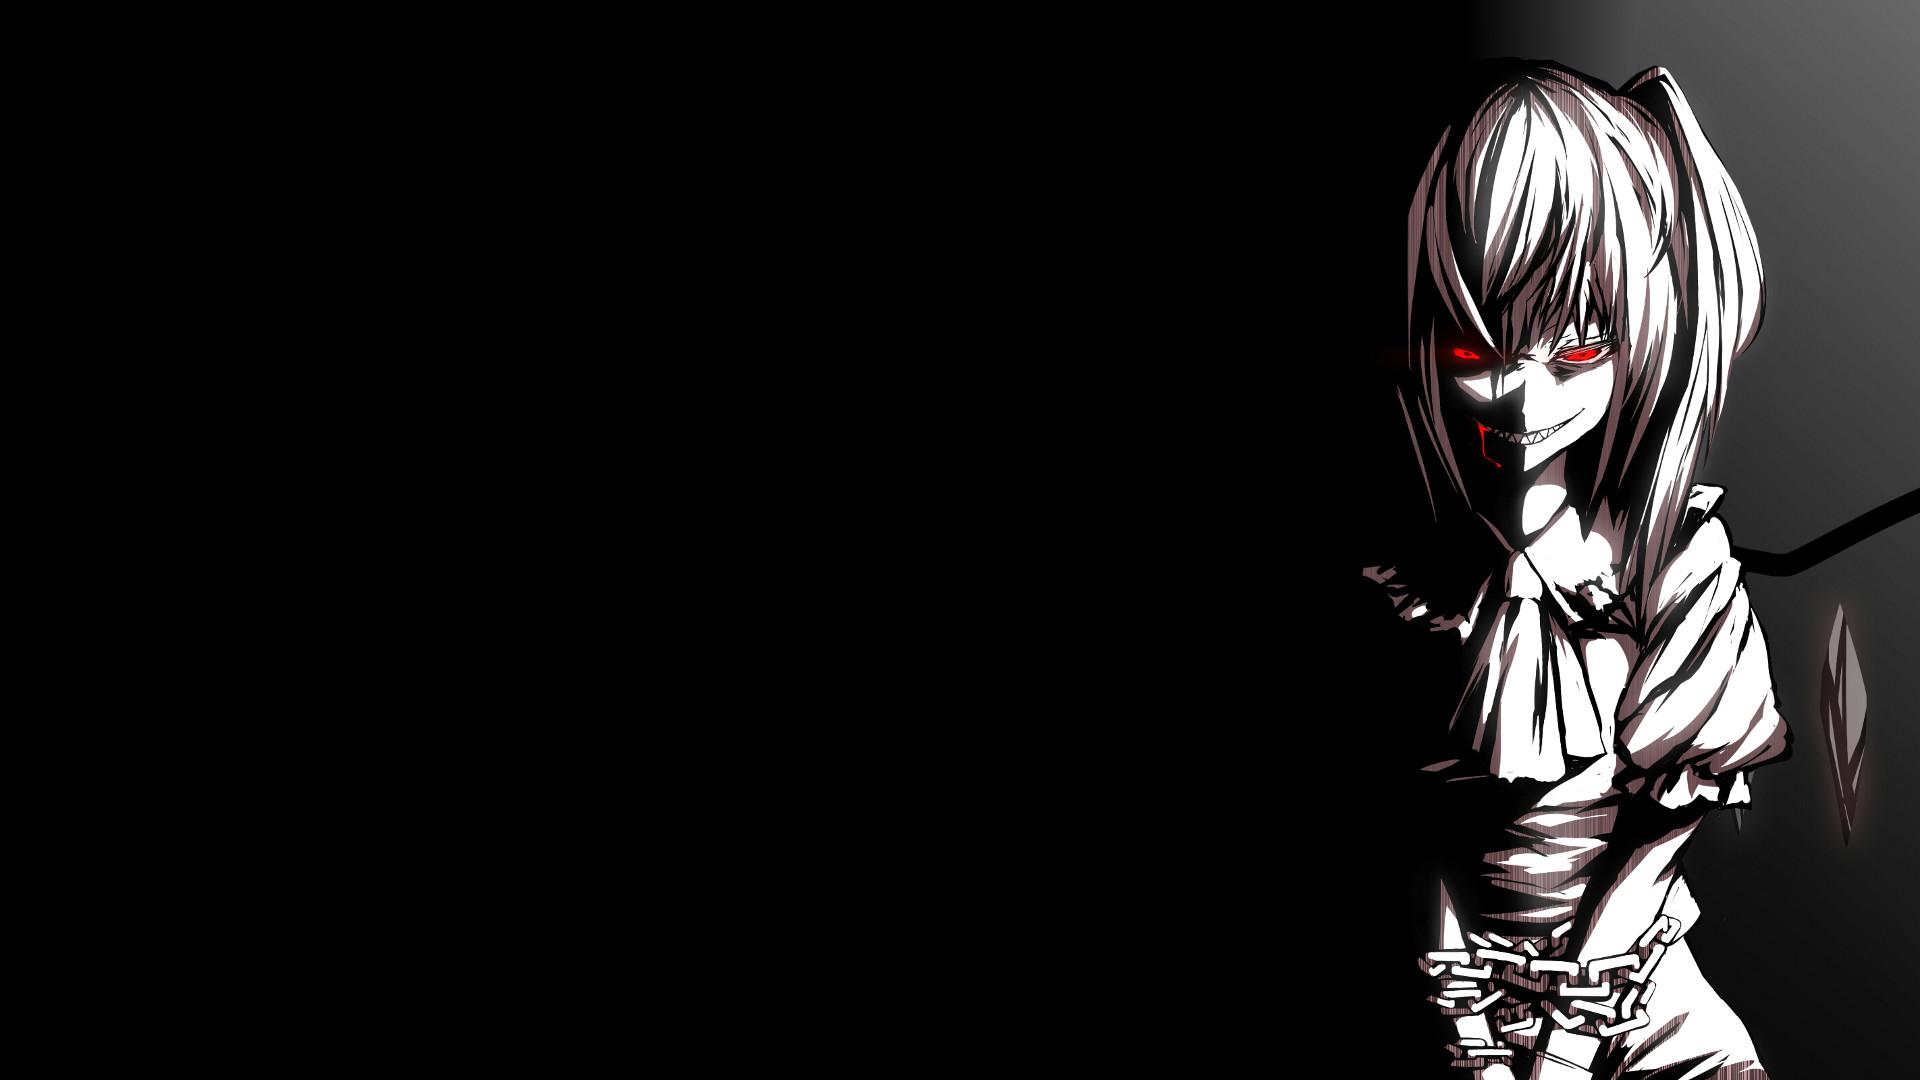 Anime Ps3 Wallpapers - Wallpaper Cave